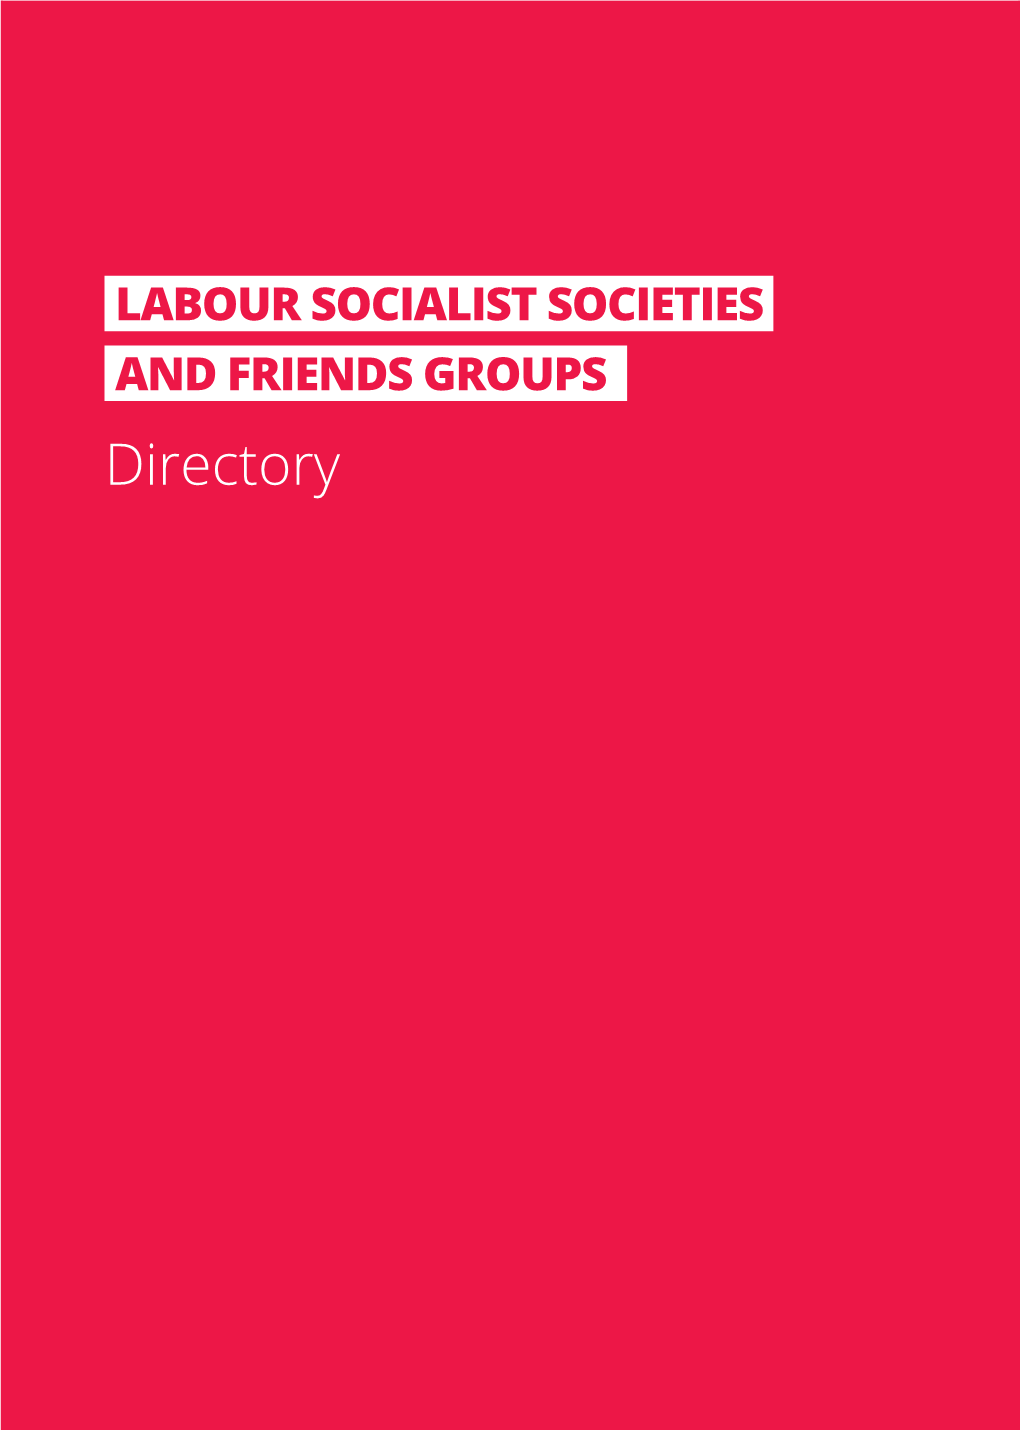 Directory Labour Socialist Society and Friends Group Directory Labour Socialist Society And